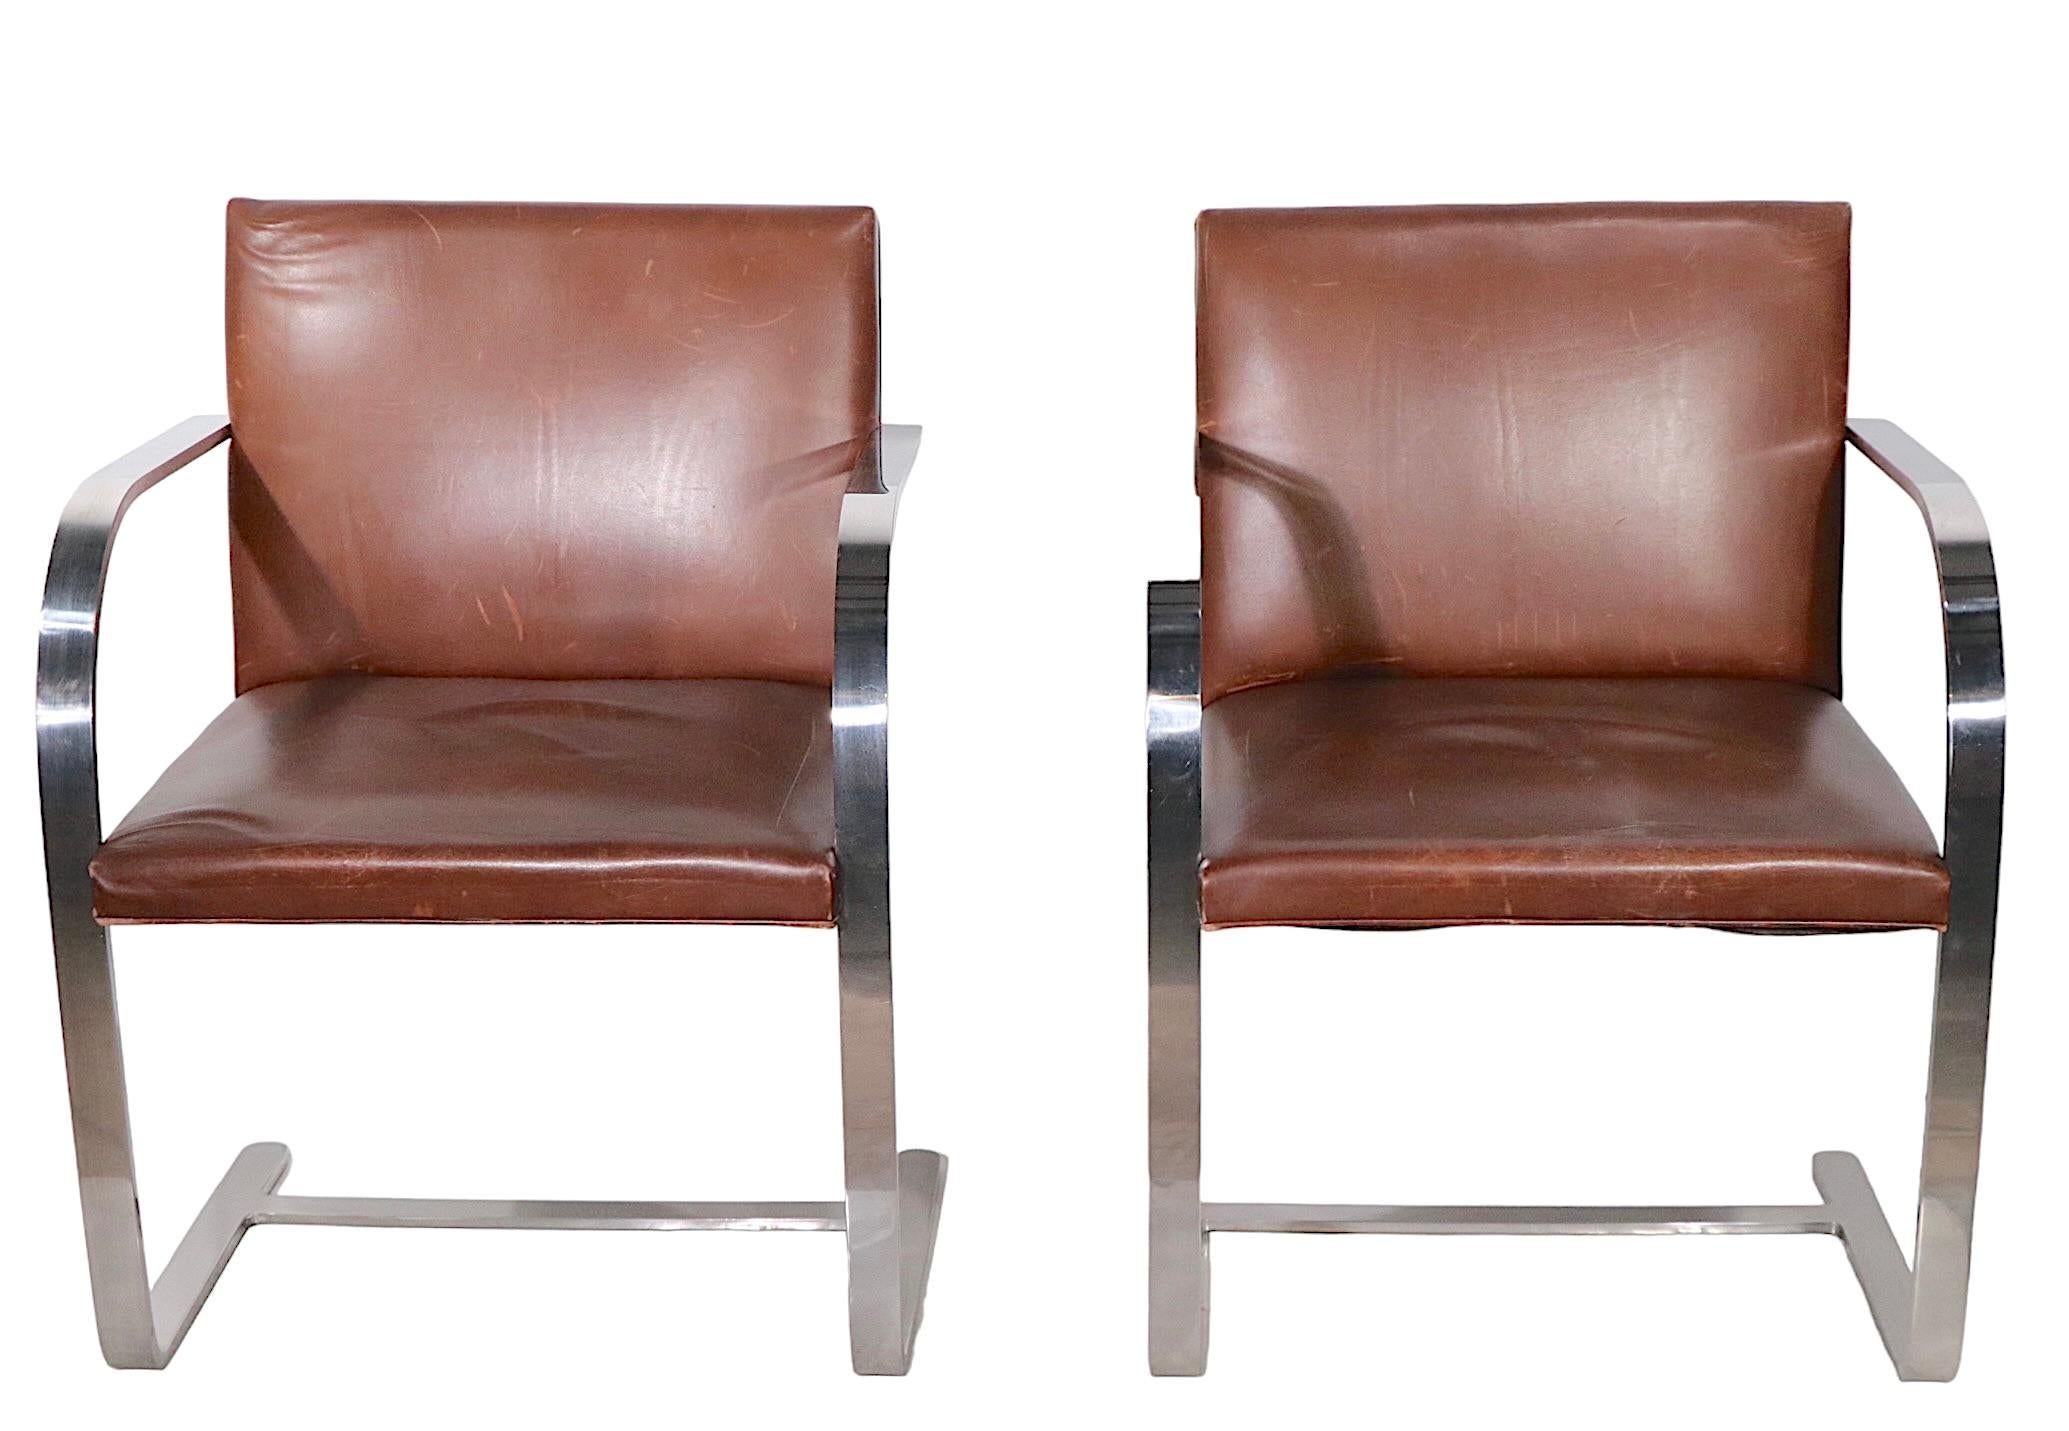 Pr. Meis Van Der Rohe Designed Brno Chairs by Knoll in Brown Leather 7